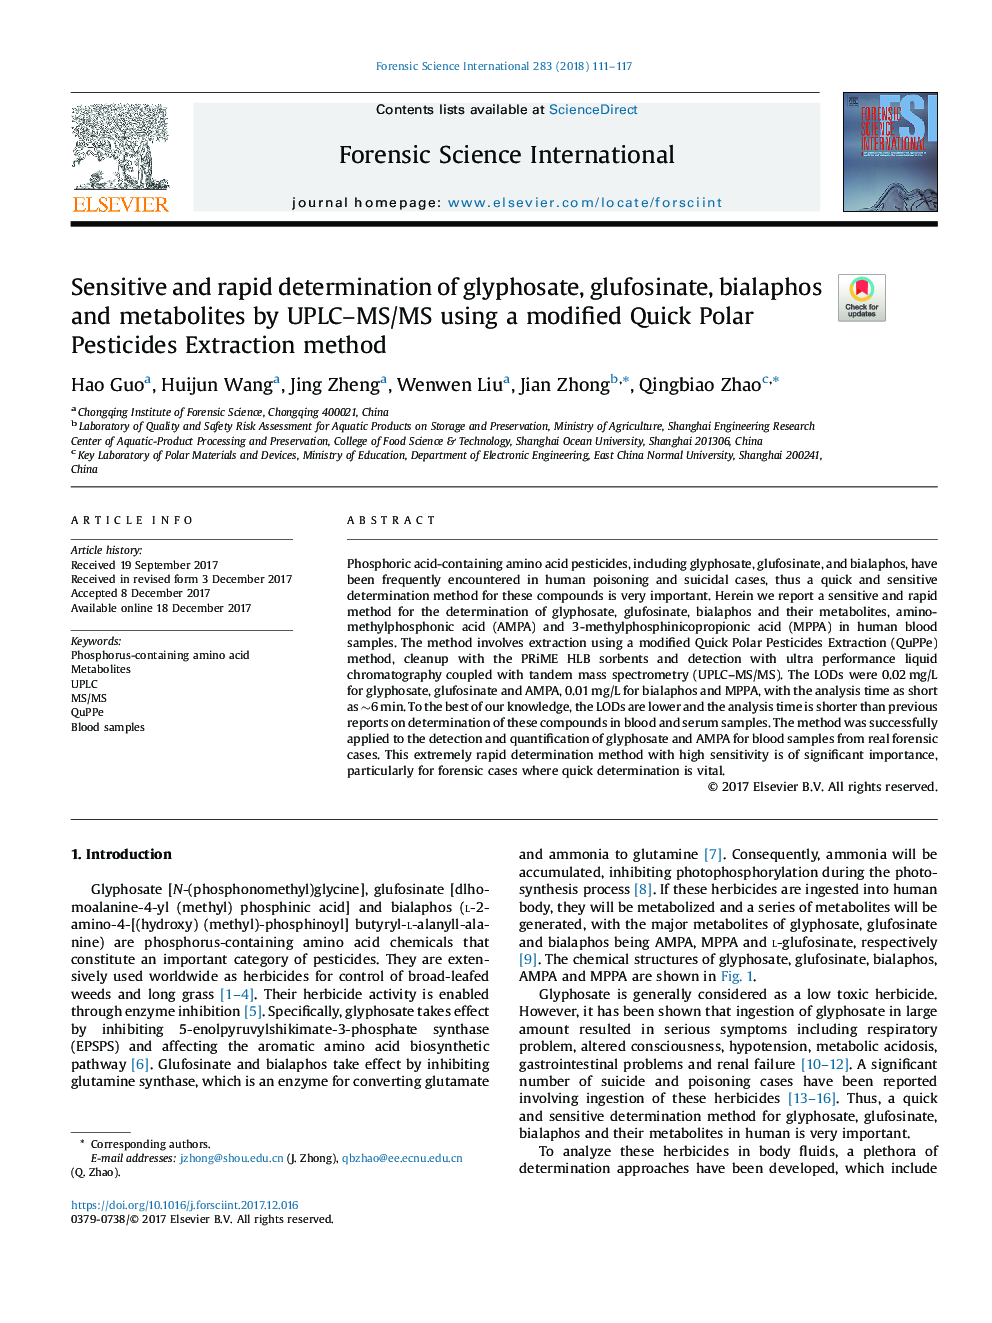 Sensitive and rapid determination of glyphosate, glufosinate, bialaphos and metabolites by UPLC-MS/MS using a modified Quick Polar Pesticides Extraction method